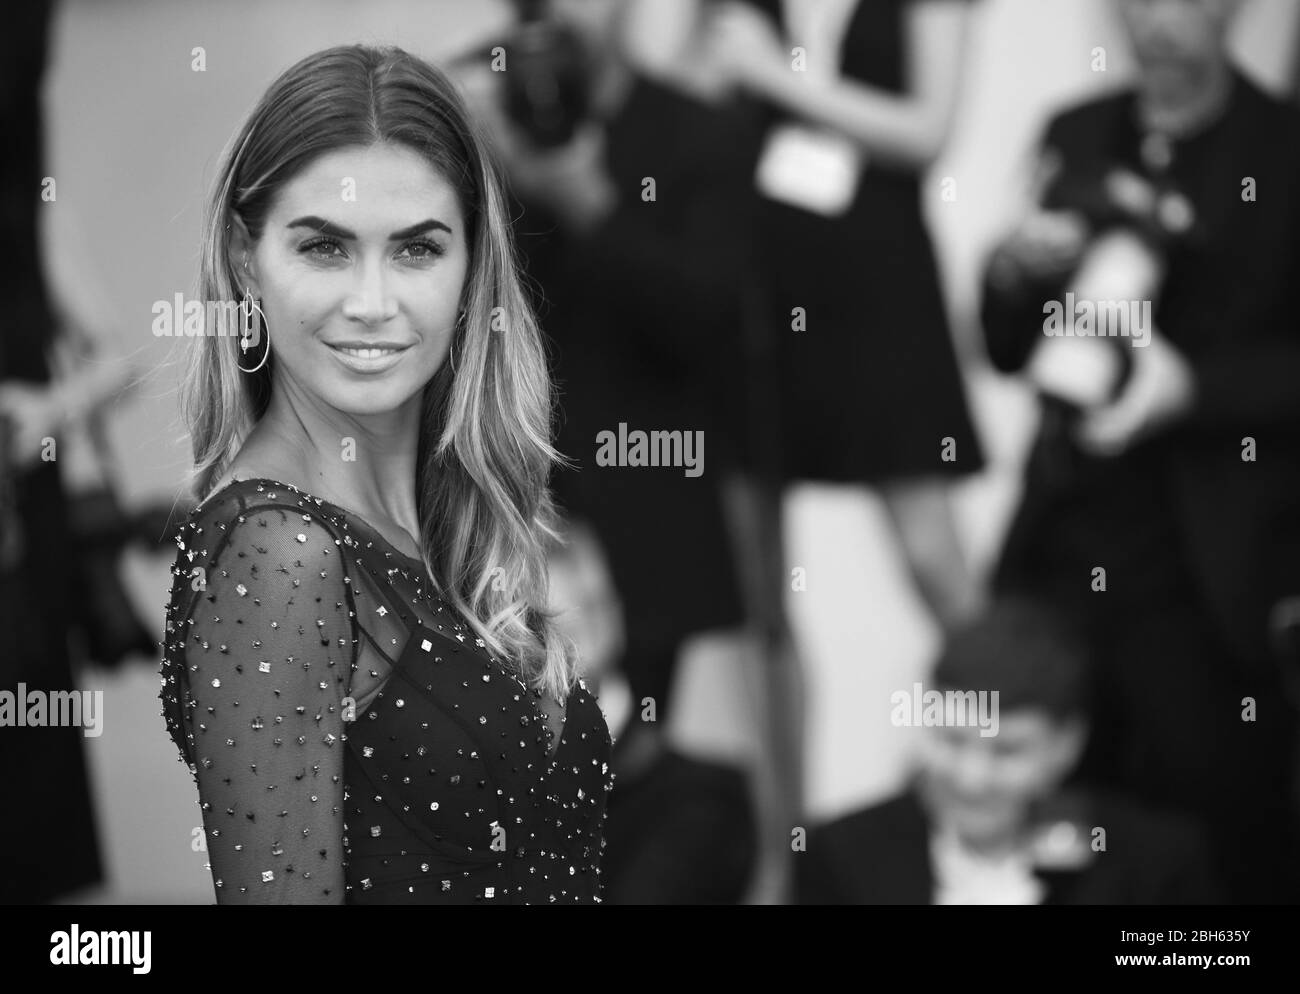 VENICE, ITALY - AUGUST 30: Melissa Satta walks the red carpet of the 'Roma' screening during the 75th Venice Film Festival on August 30, 2018 Stock Photo